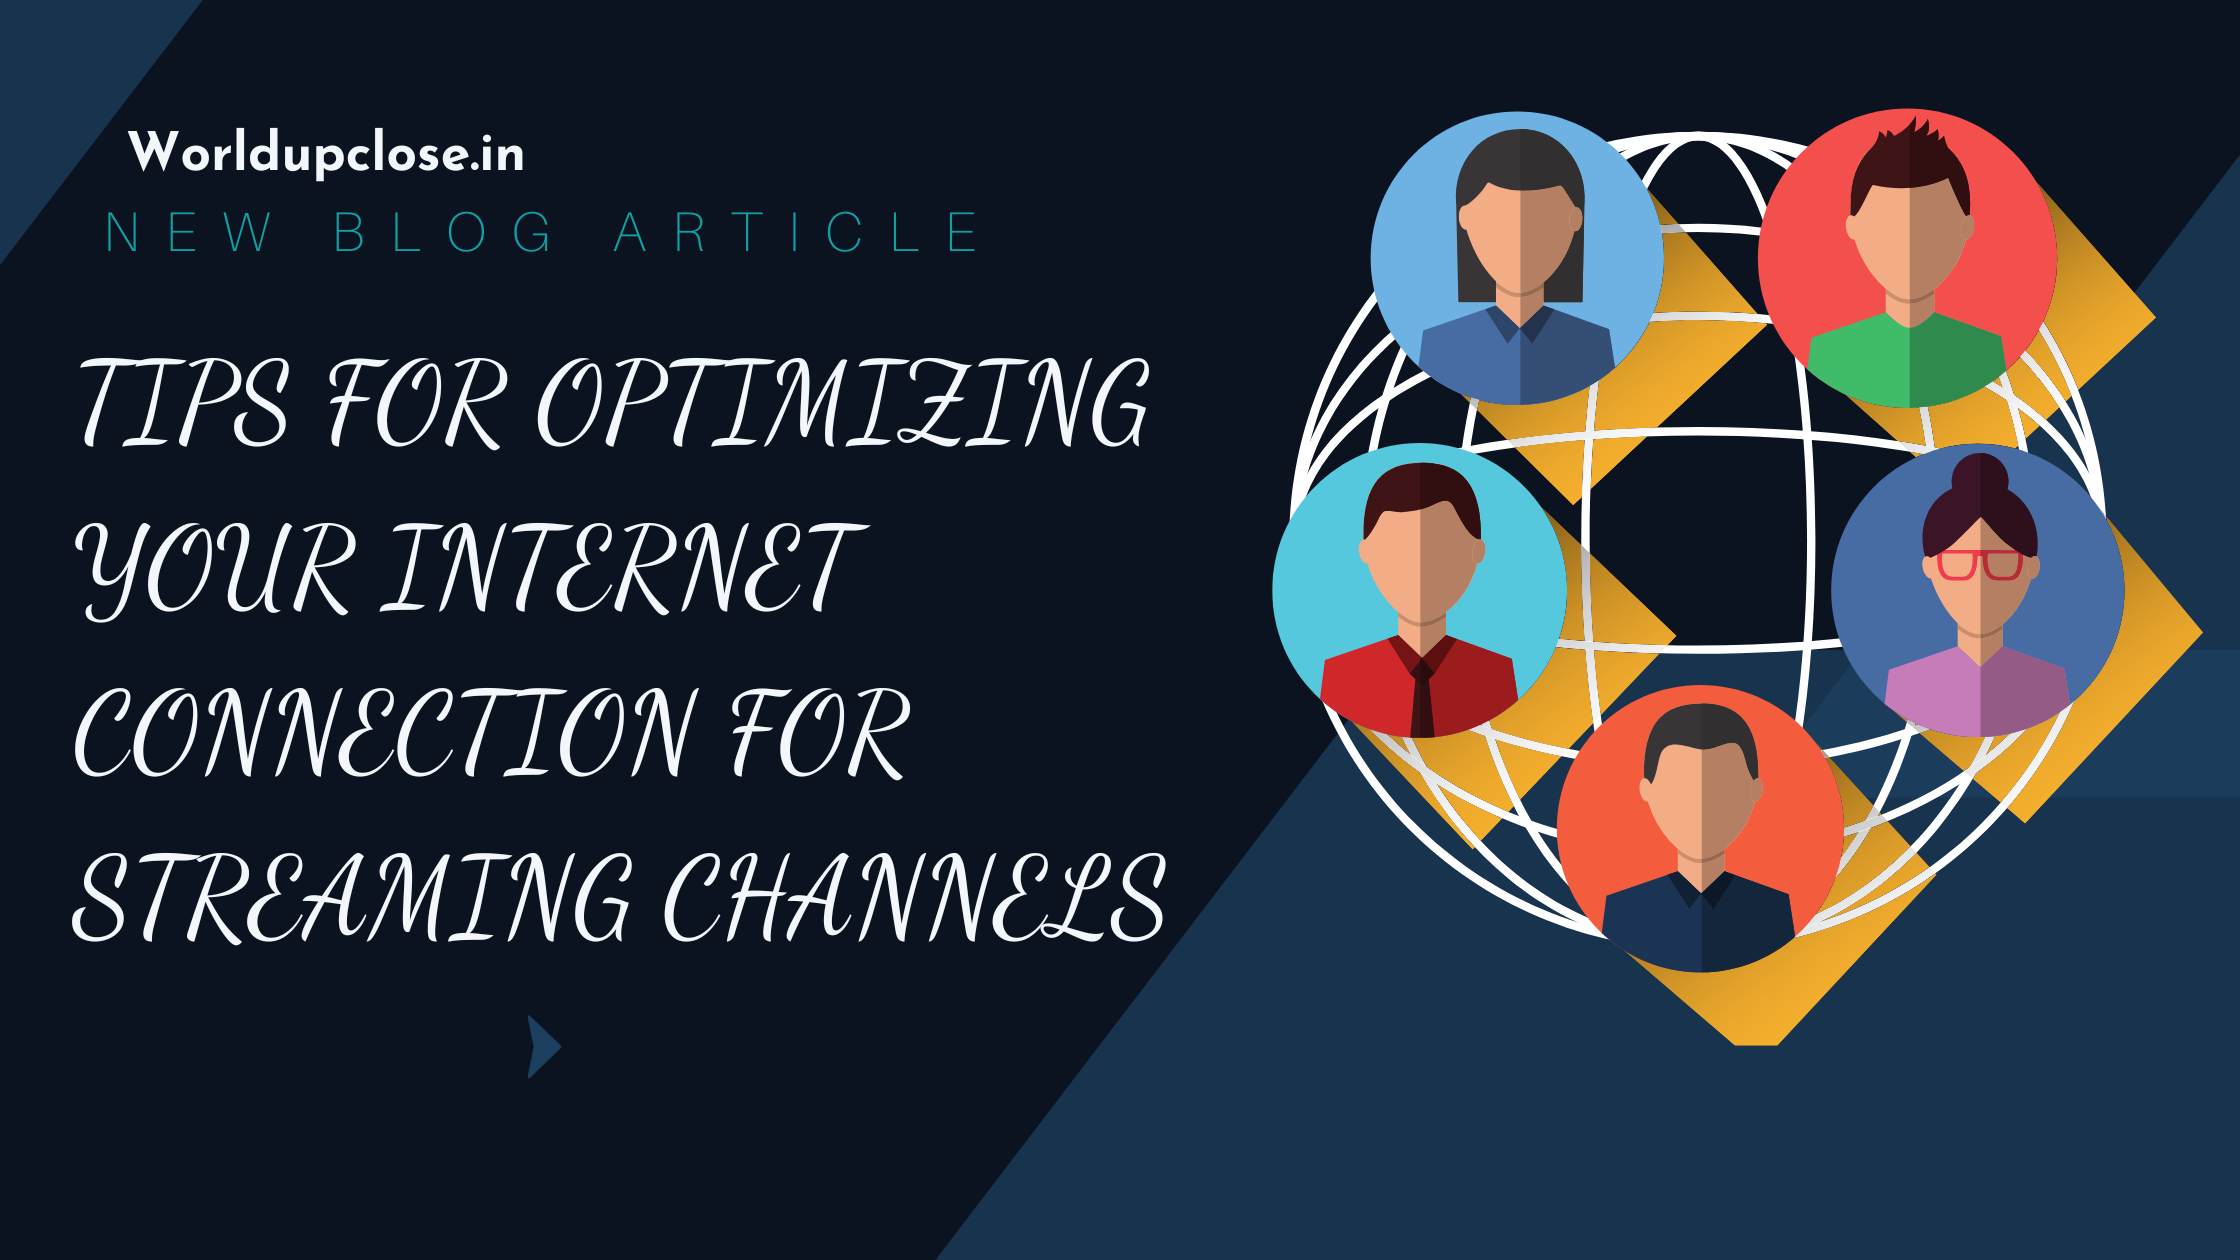 7 Tips for Optimizing Your Internet Connection for Streaming Channels 18